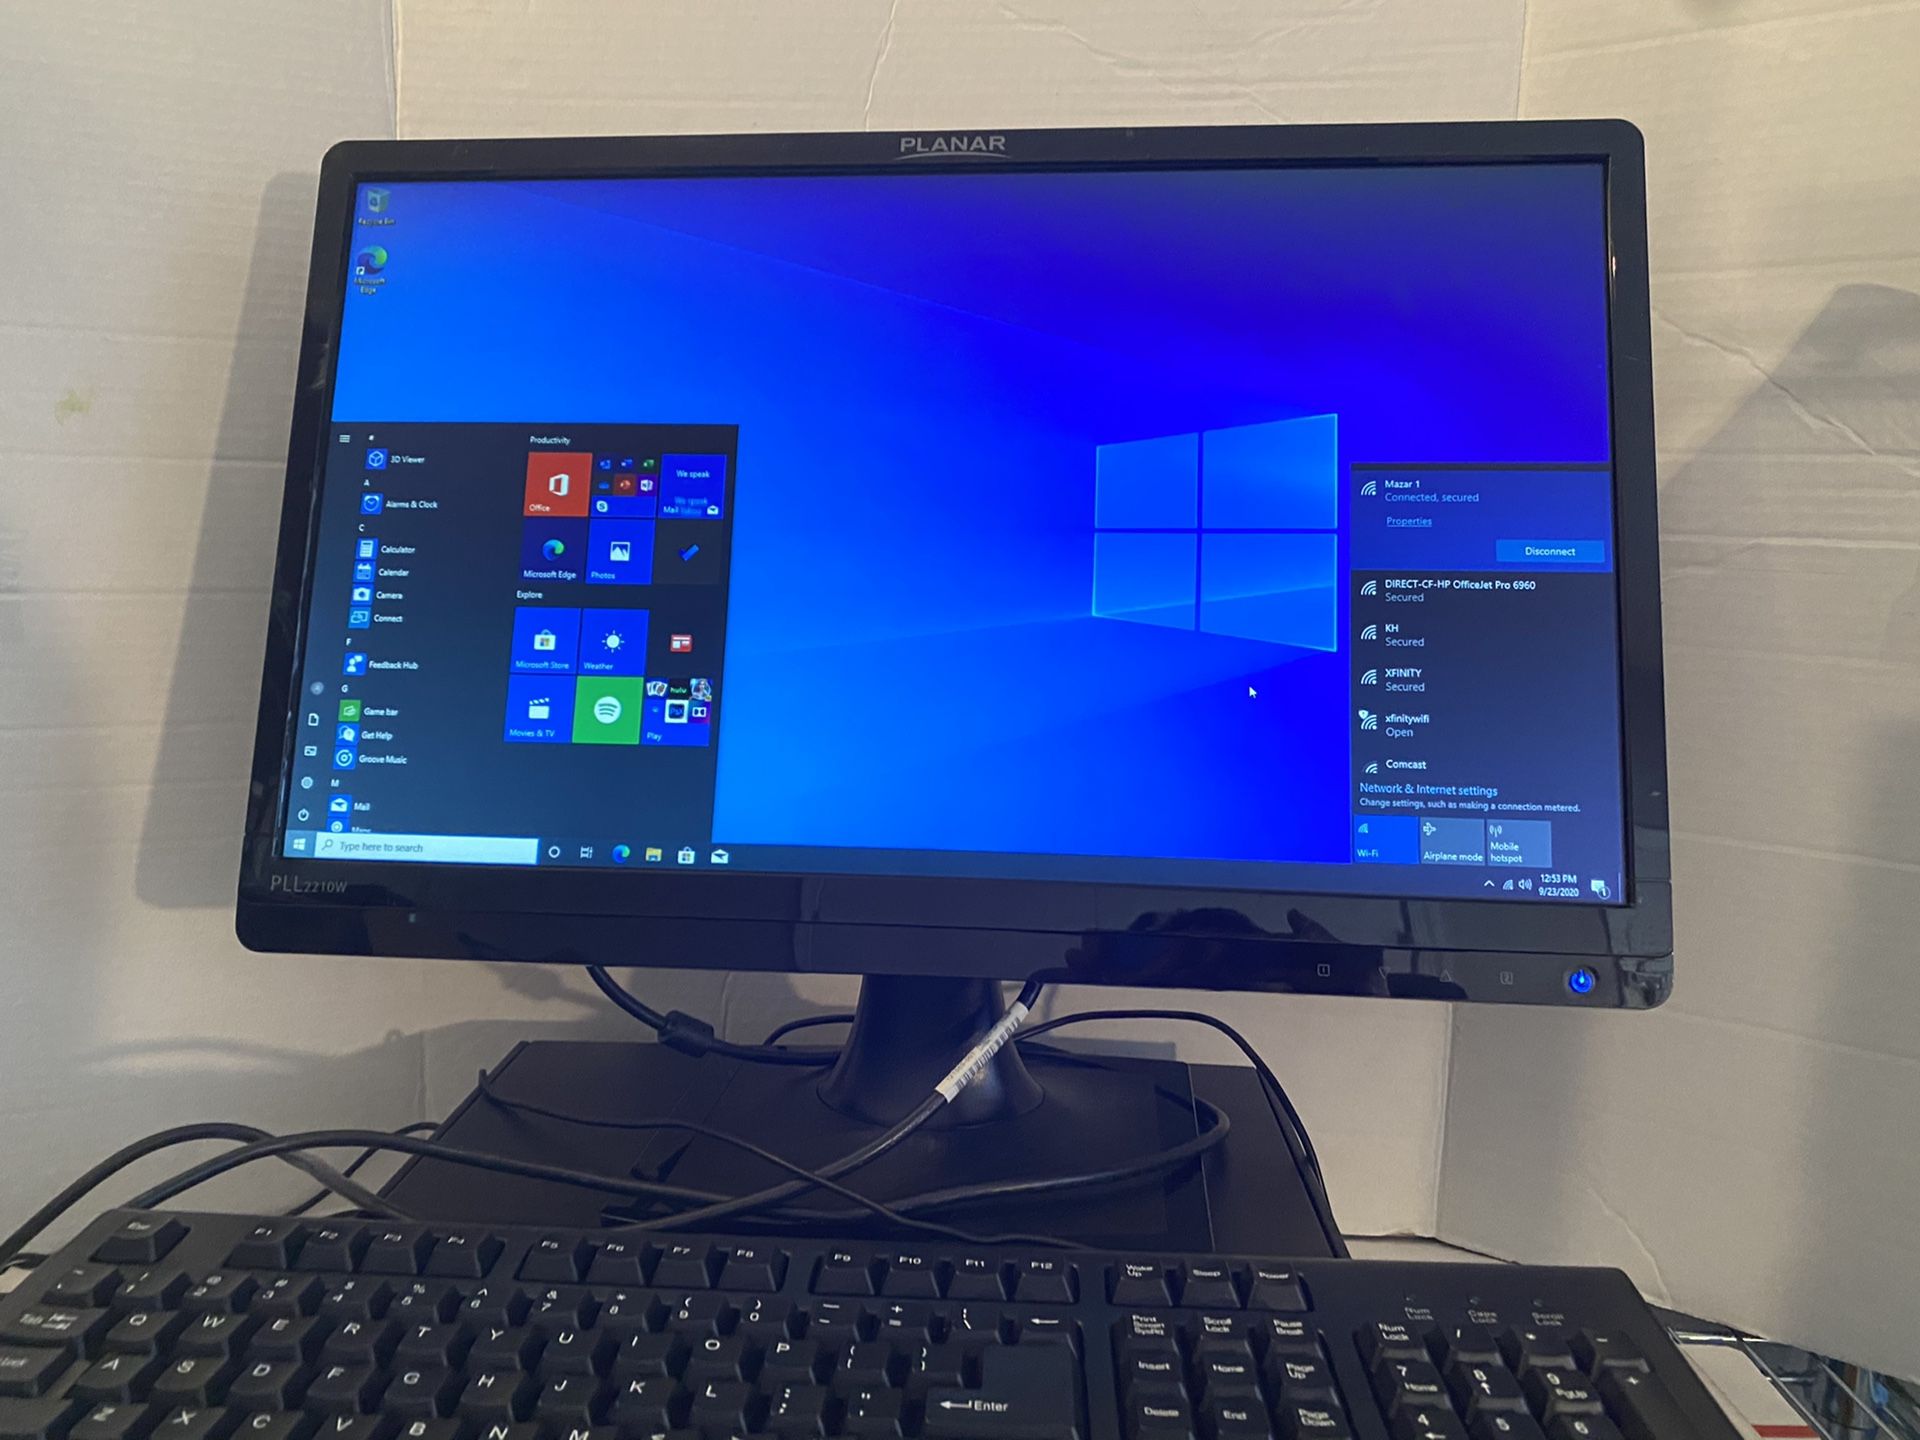 Hp Compaq 6005, AMD Processor, 8gb ram, 160gb Hard drive , WiFi adapter, windows 10 Pro, 22” Monitor, brand new keyboard, mouse , cables all for only